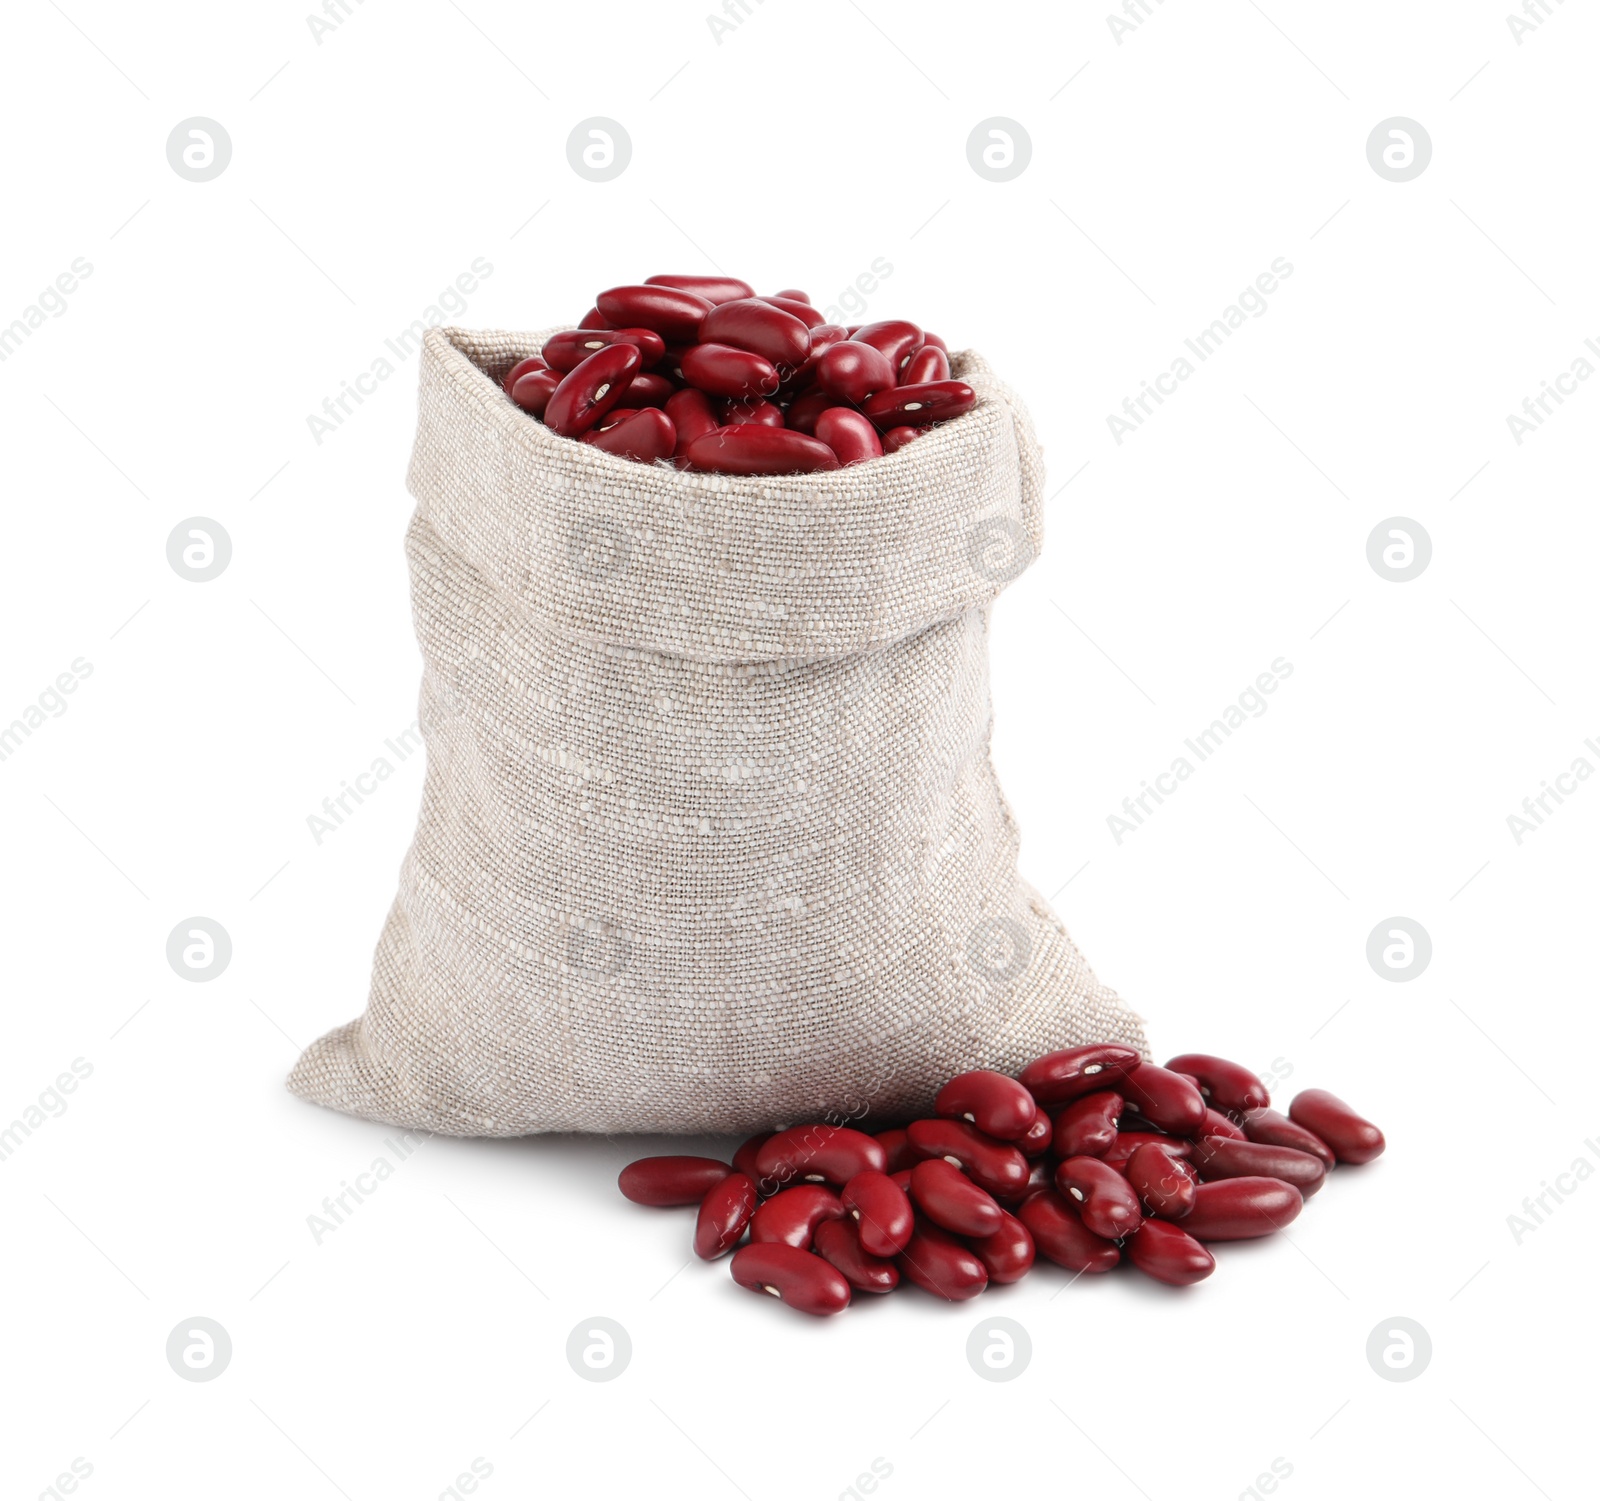 Photo of Raw red kidney beans with sackcloth bag isolated on white